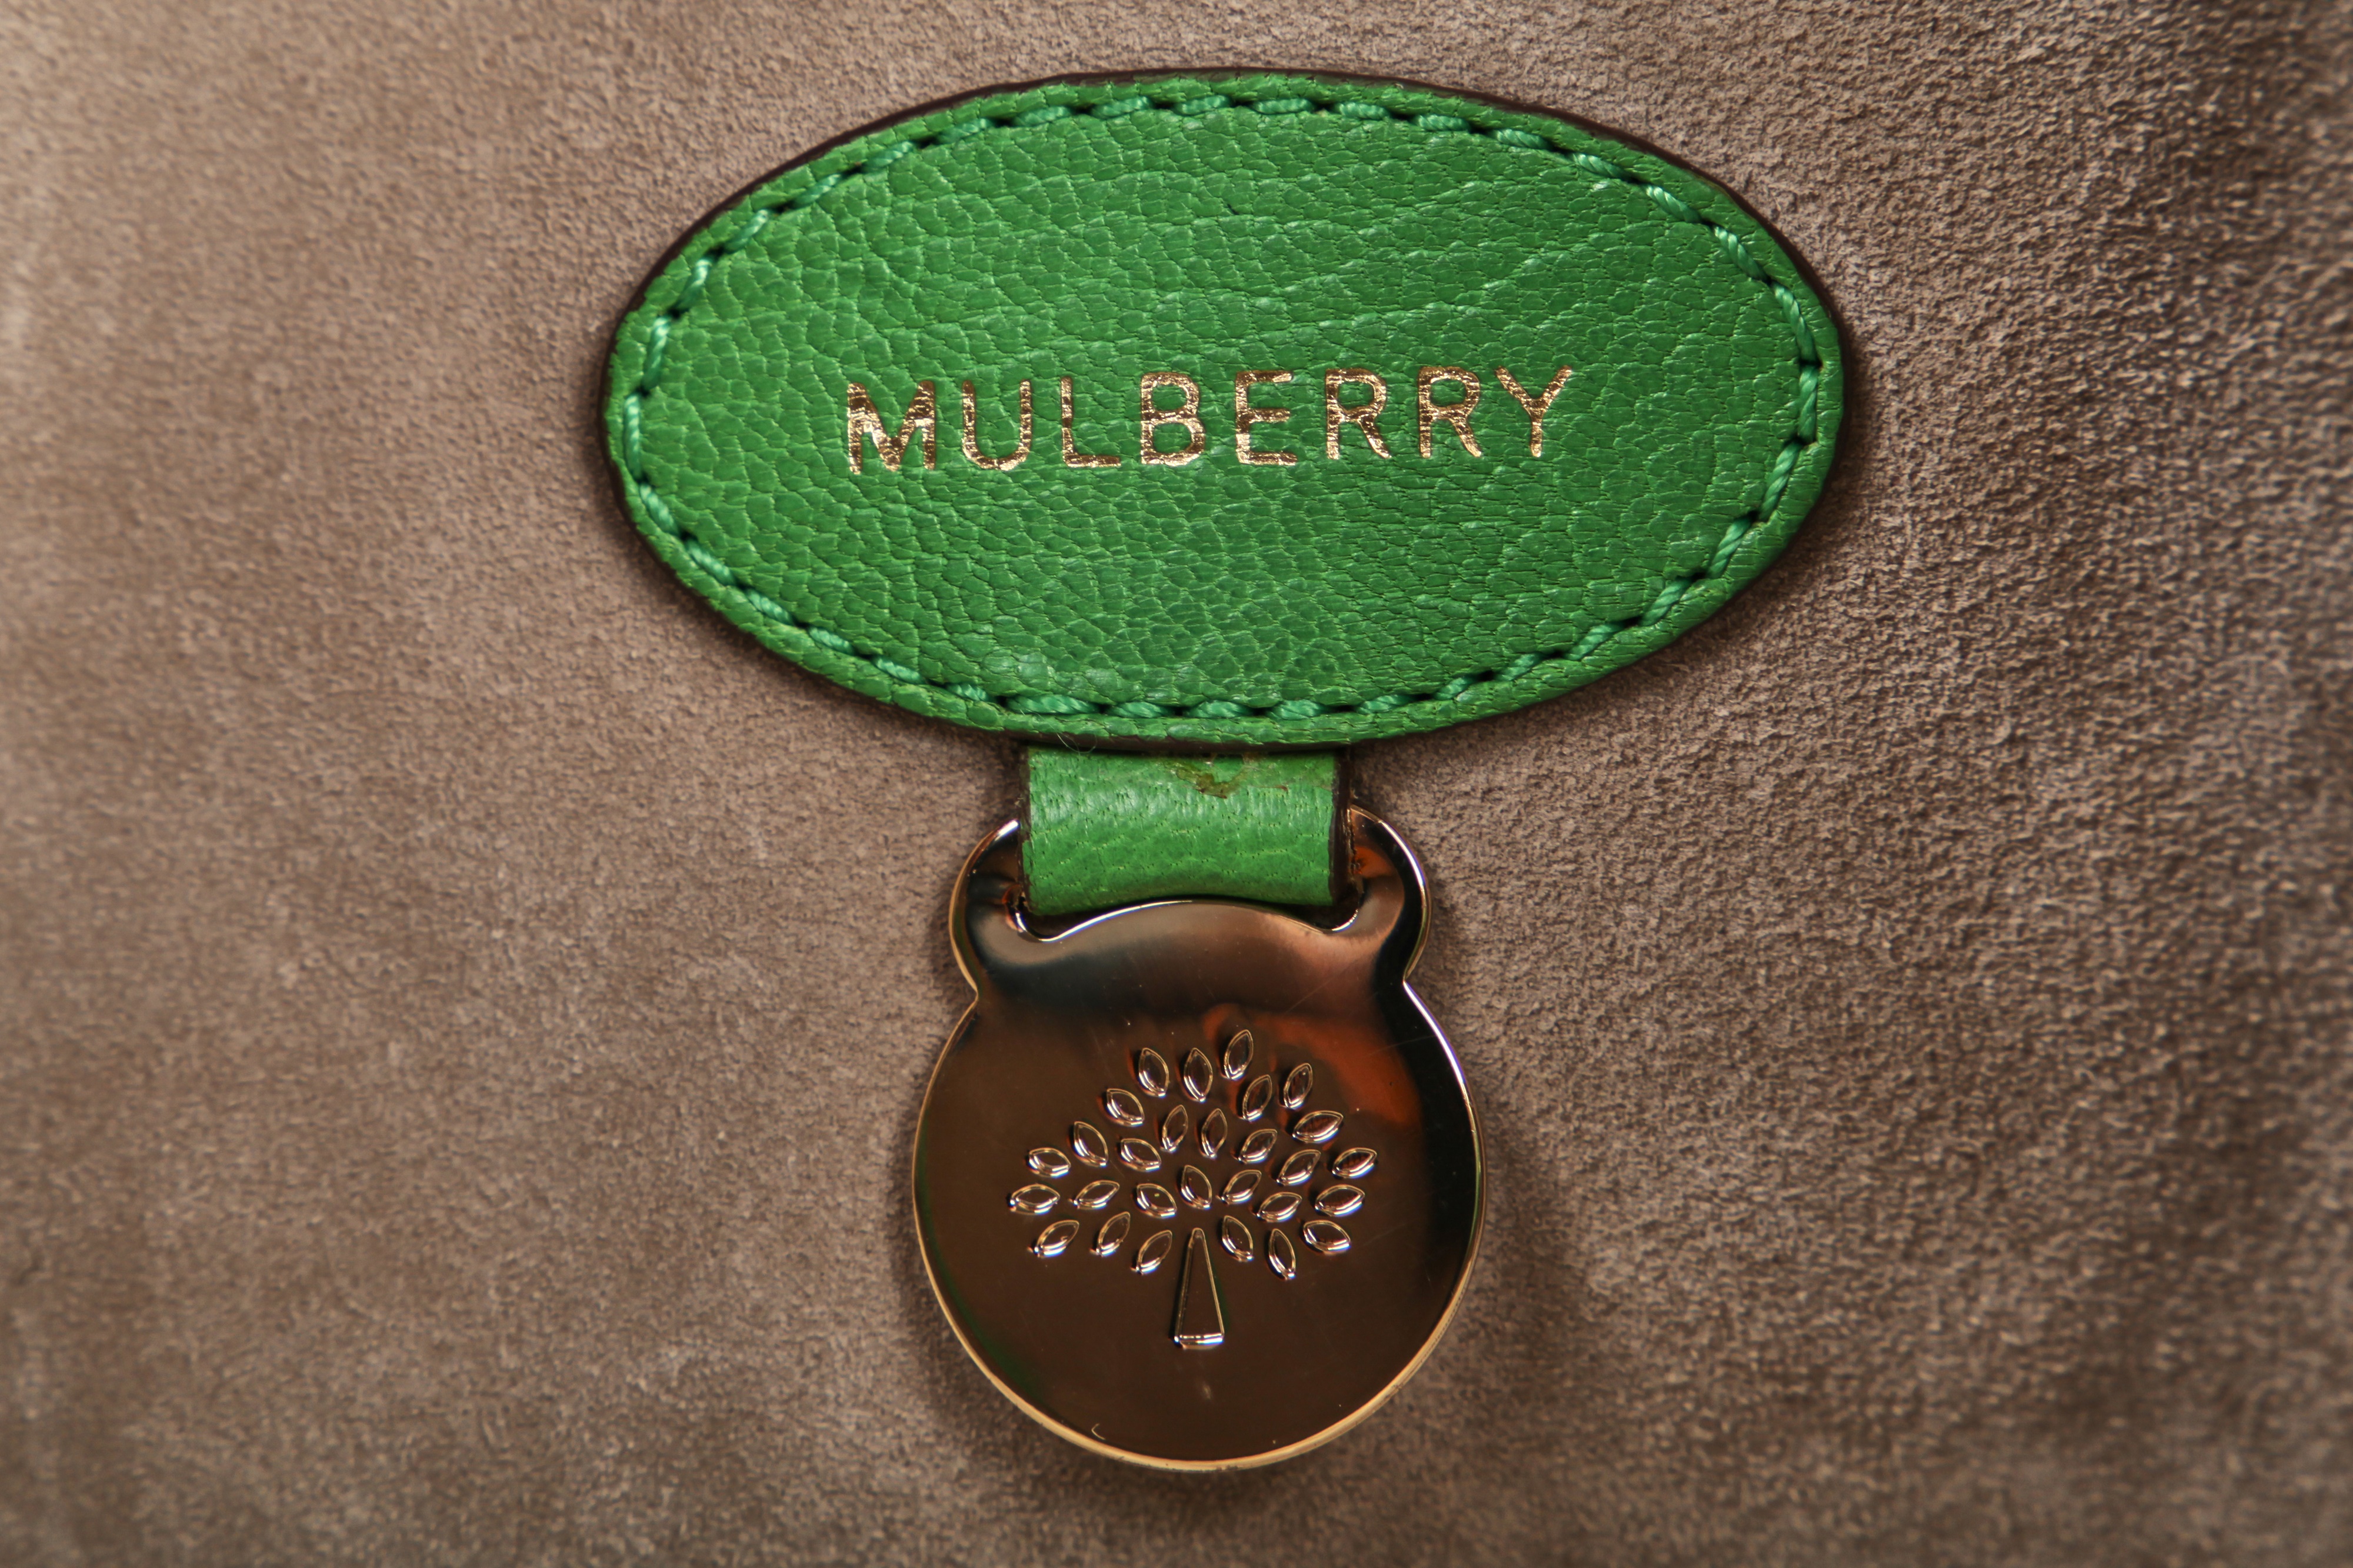 How To Spot a Fake Mulberry